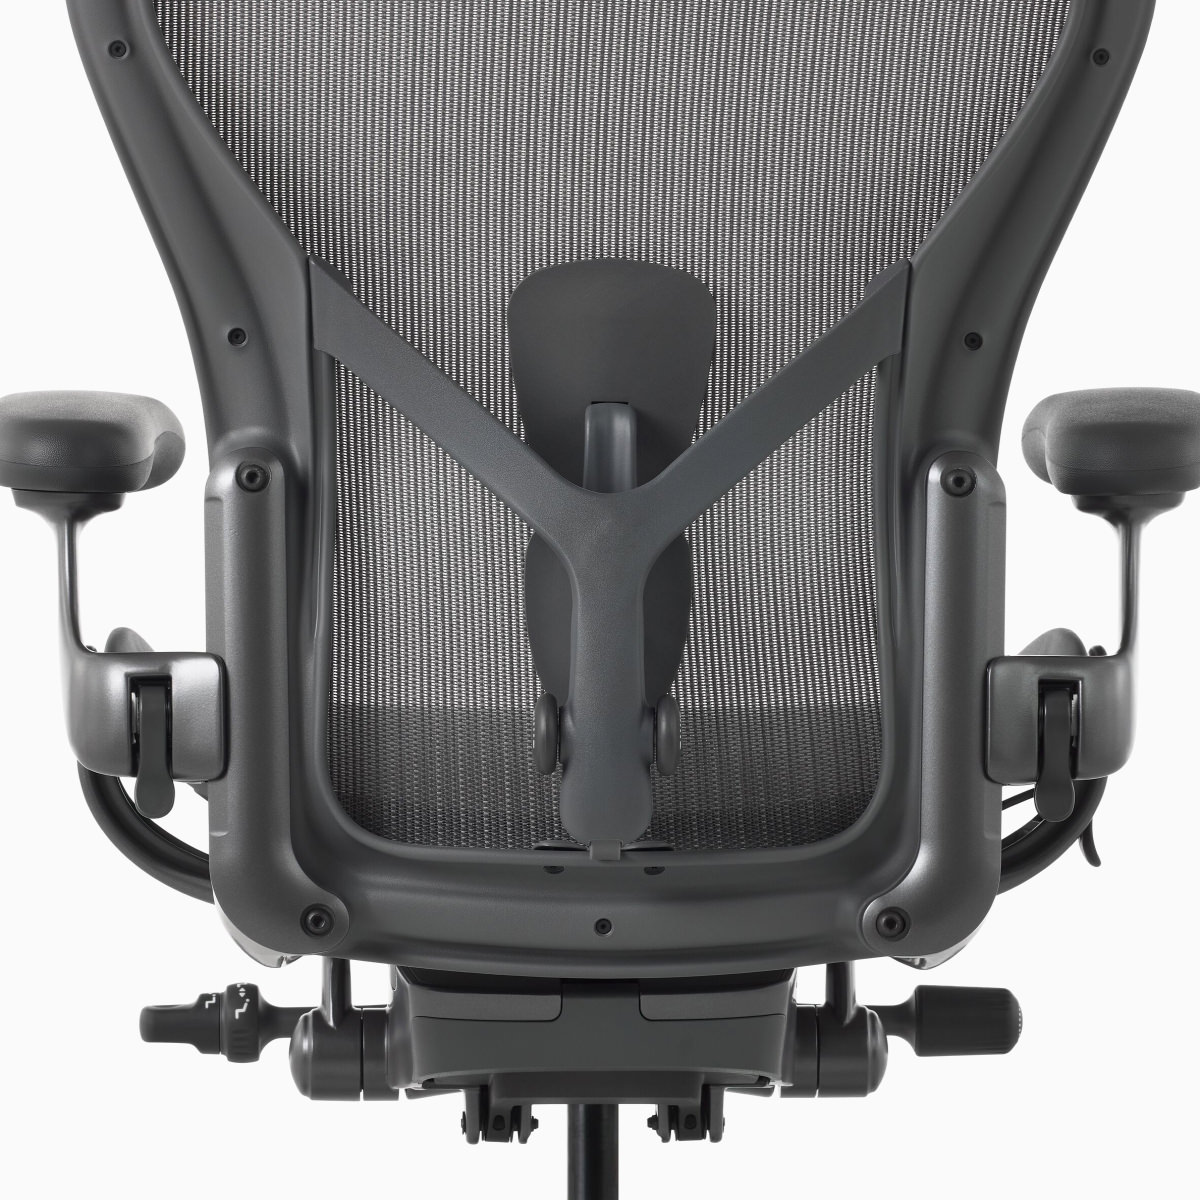 Back view of an Aeron Chair with adjustable PostureFit SL.